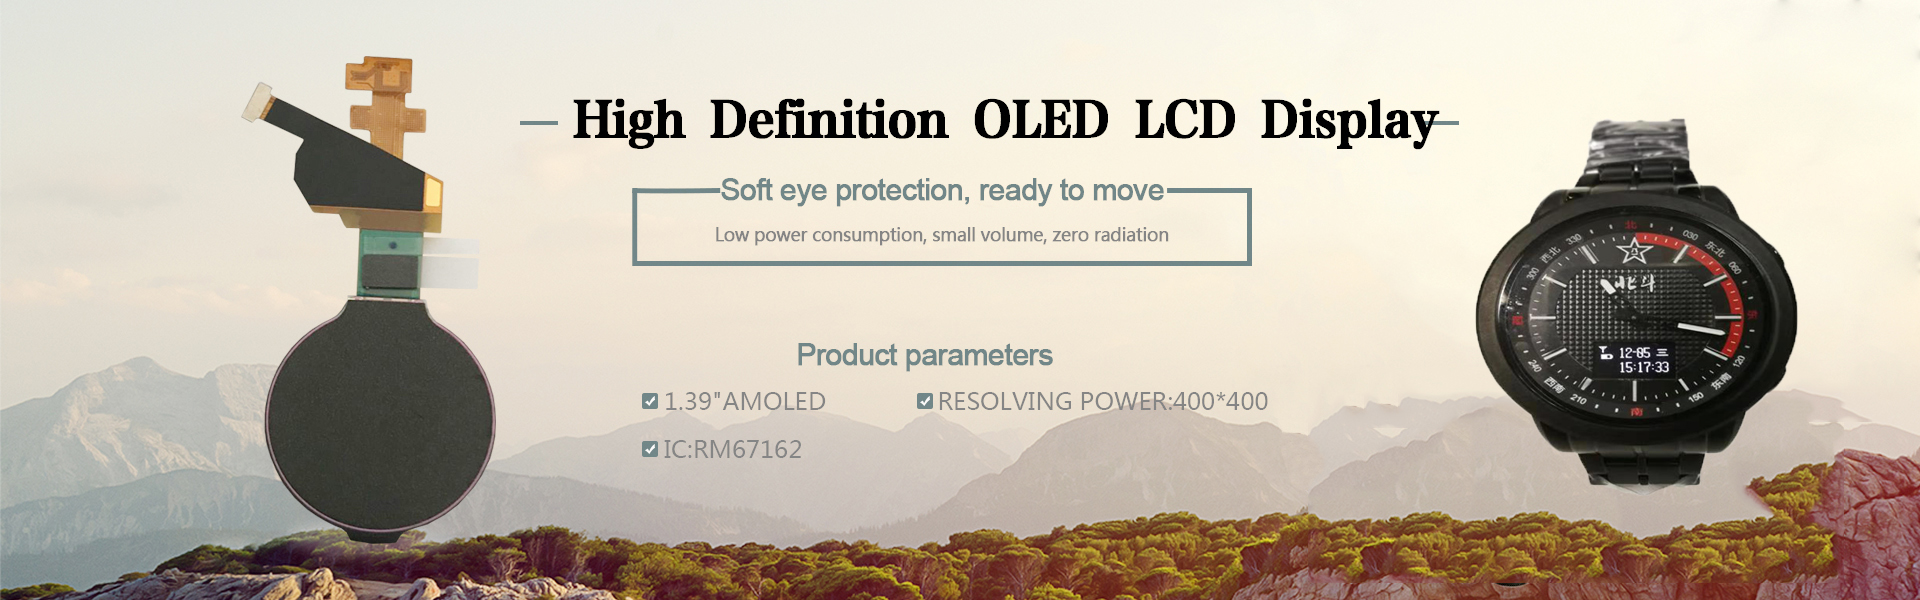 Shenzhen ORIC Electronics Co., Ltd. is a TFT LCD manufacturer, OLED display manufacturer and LCD display manufacturer.